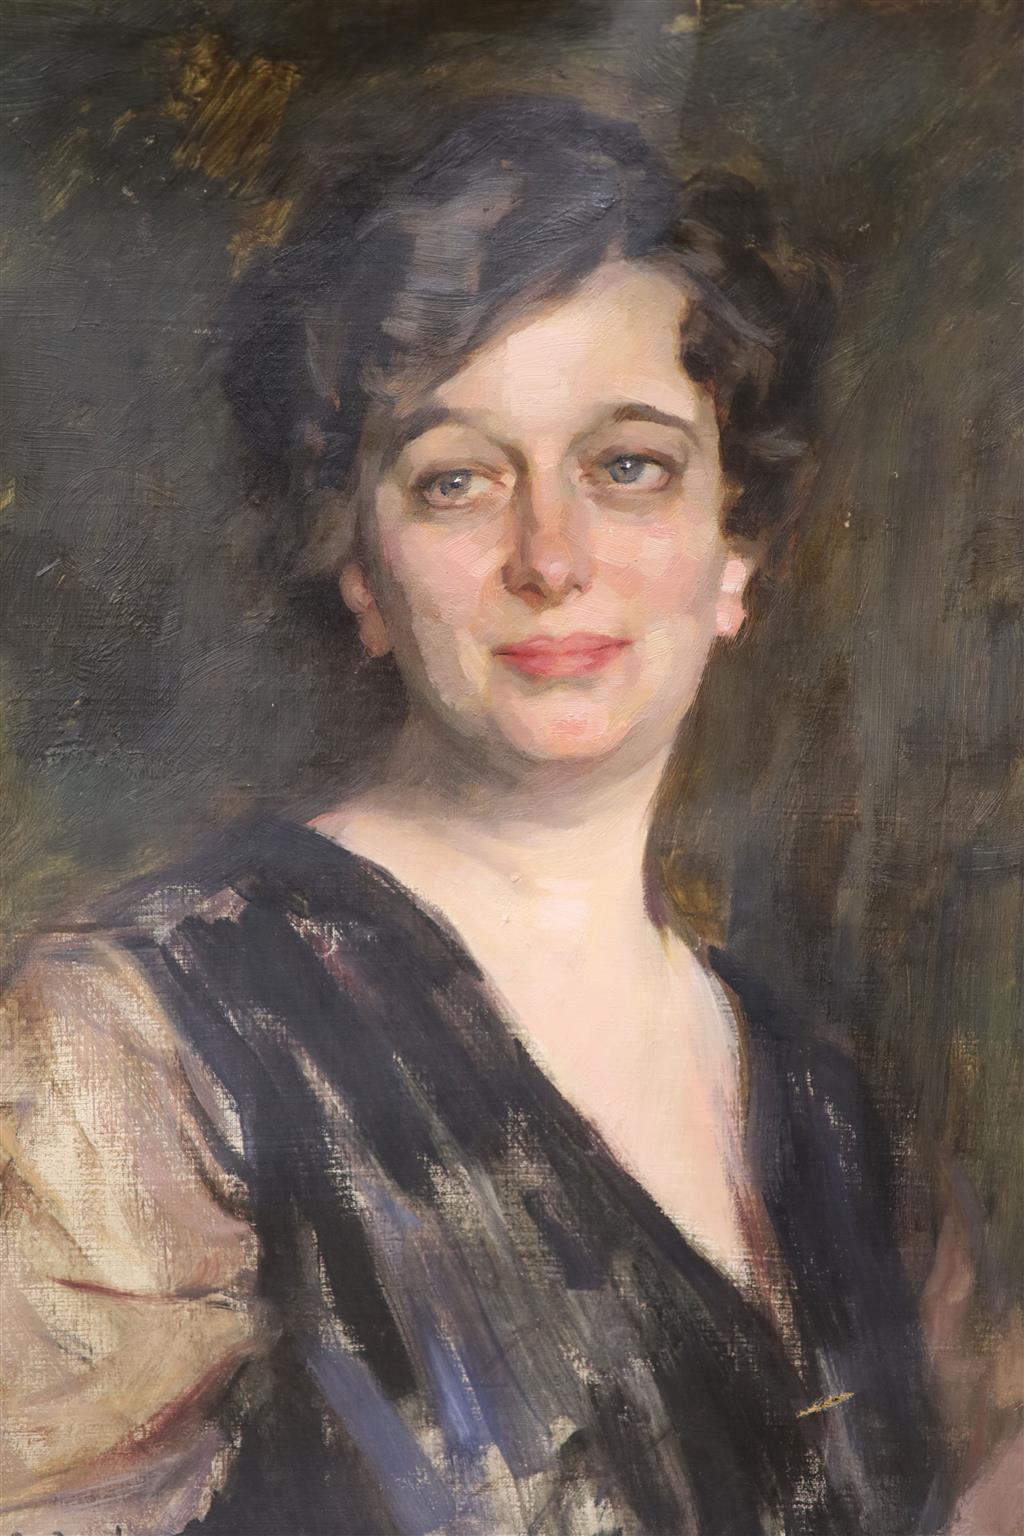 Mario Micheletti, (Italian, 1892-1975), oil on canvas, Portrait sketch of a lady, signed and dated London 1921, 61 x 51cm, Christies s